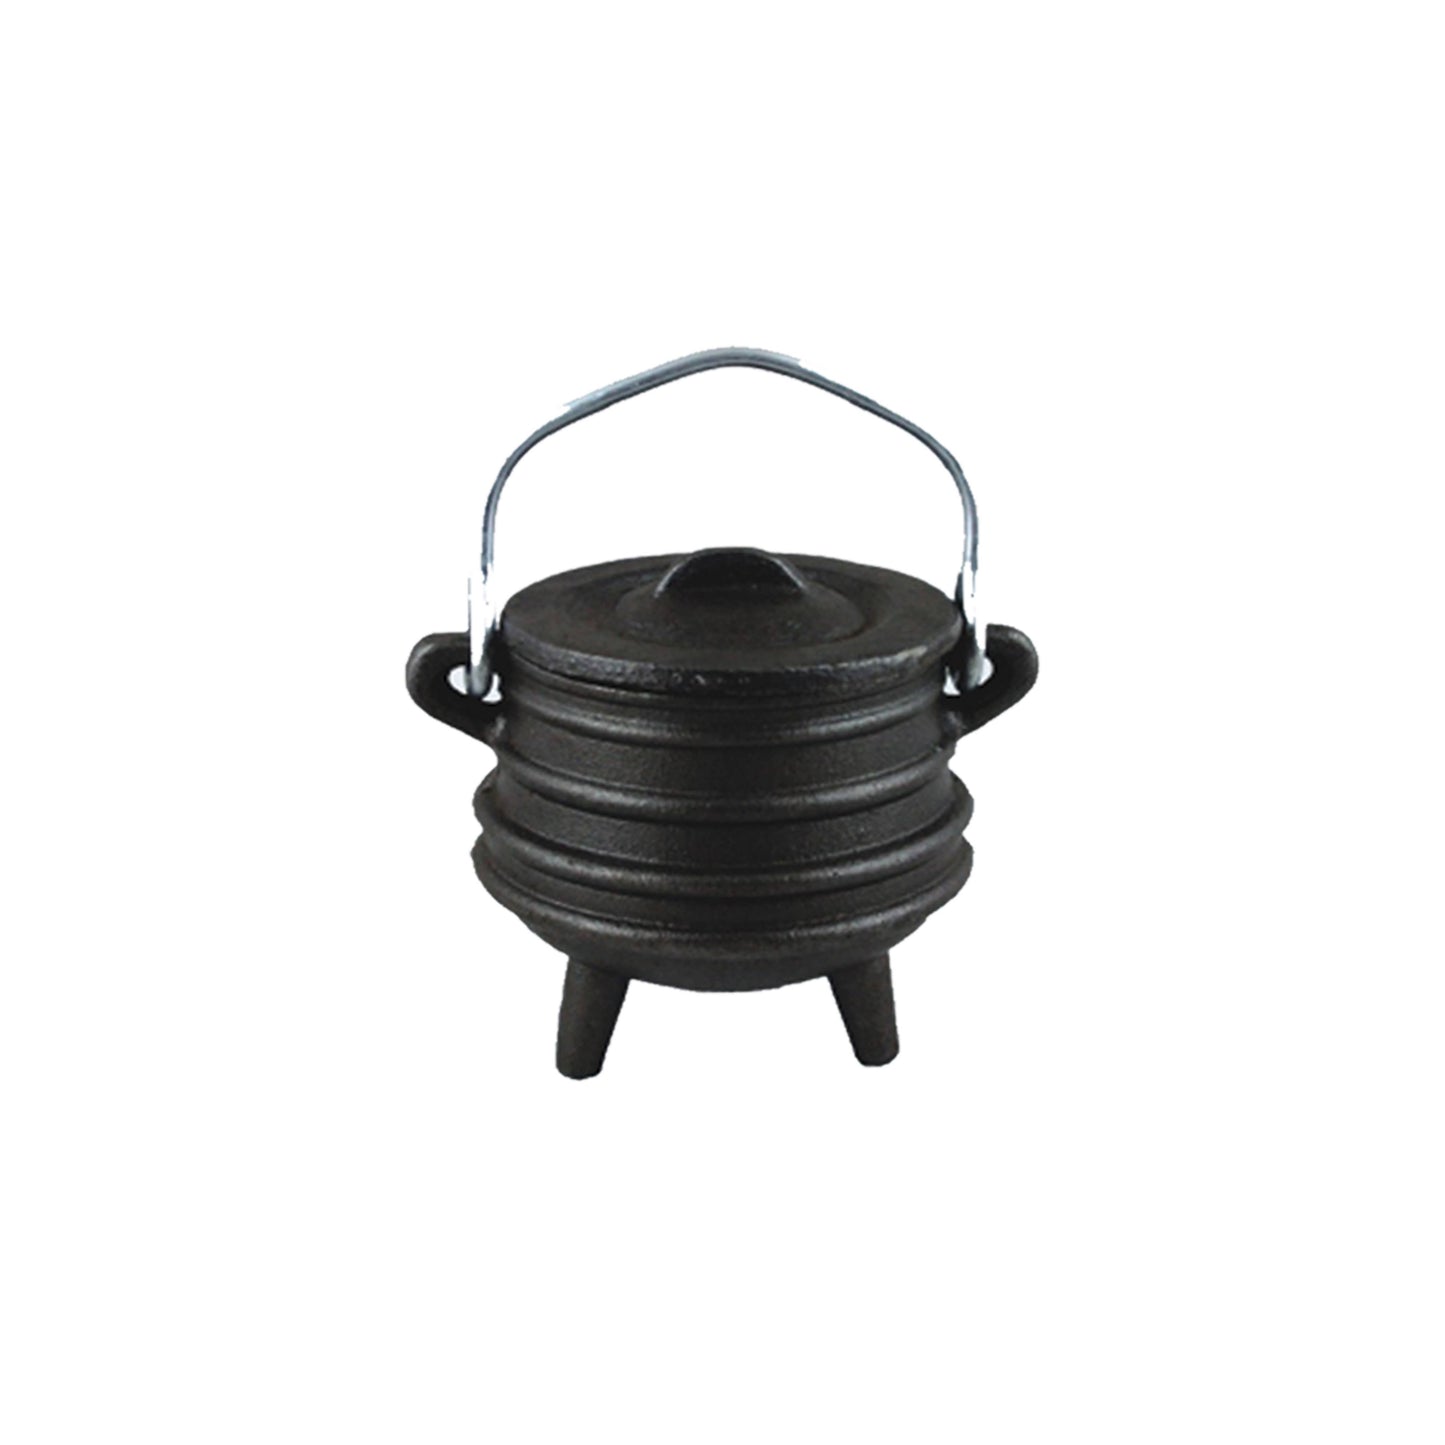 Cast Iron Cauldron 4.5 inch with Holder Handle and Lid